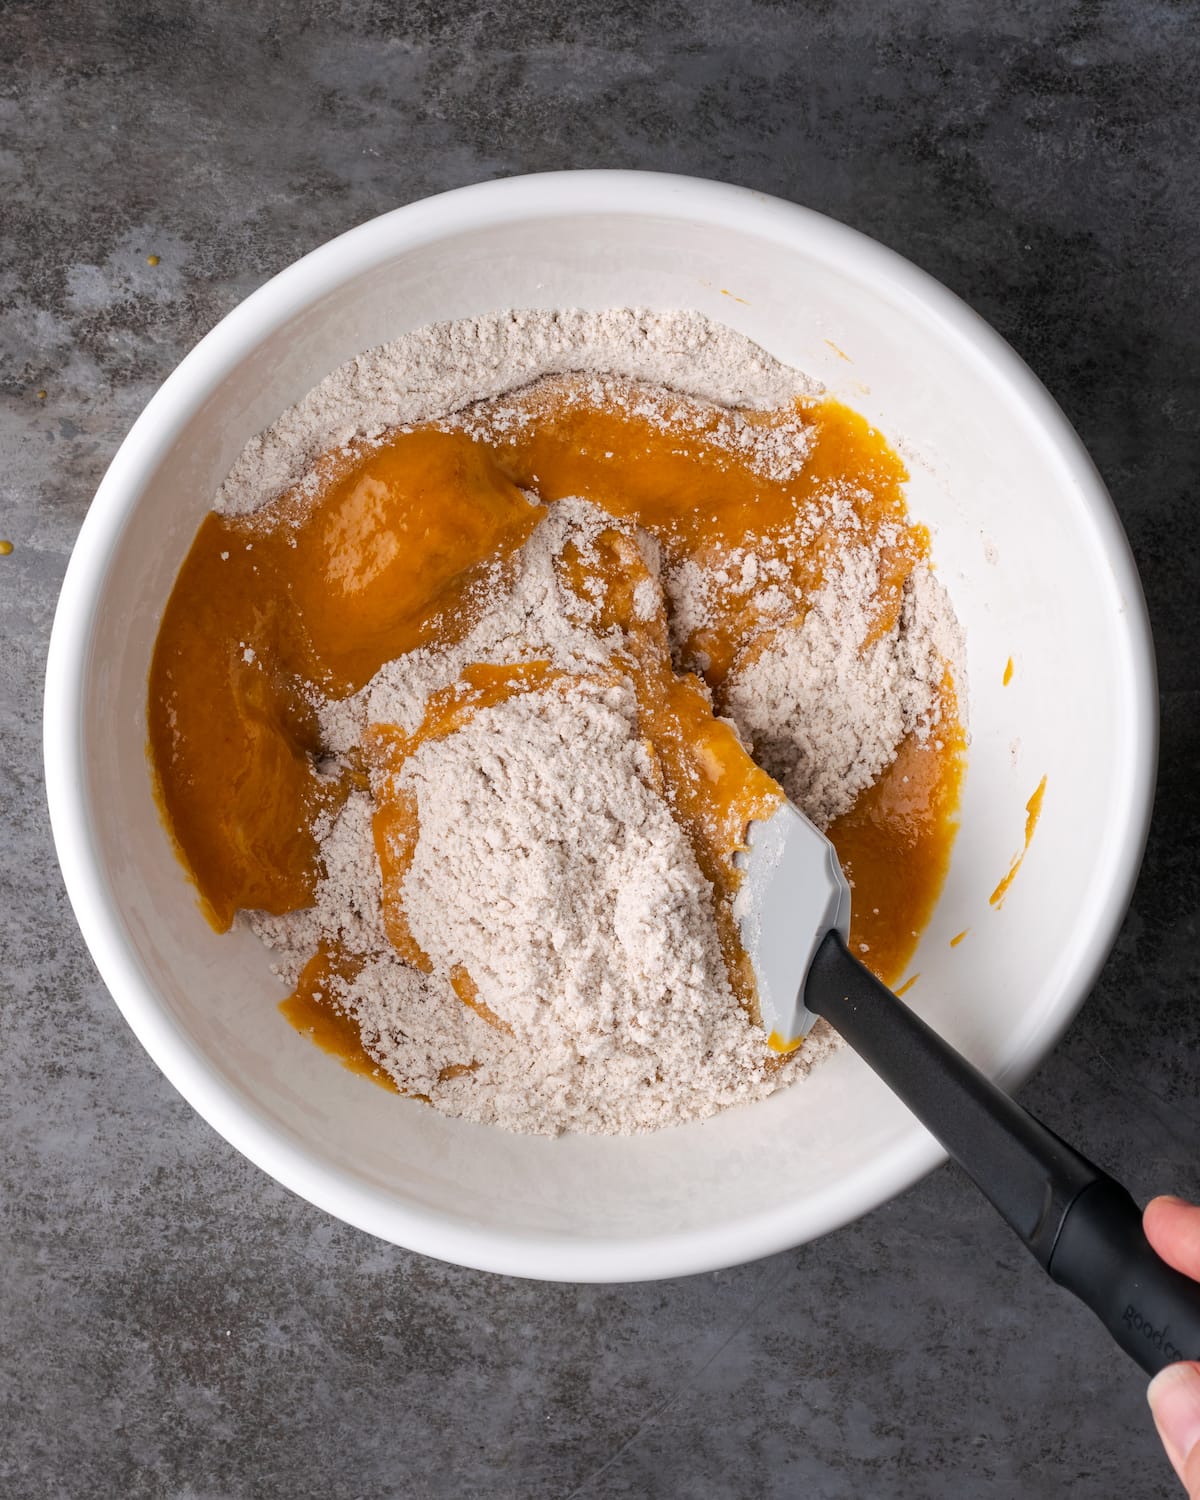 Dry ingredients added into a bowl with the wet ingredients for the pumpkin cake batter.